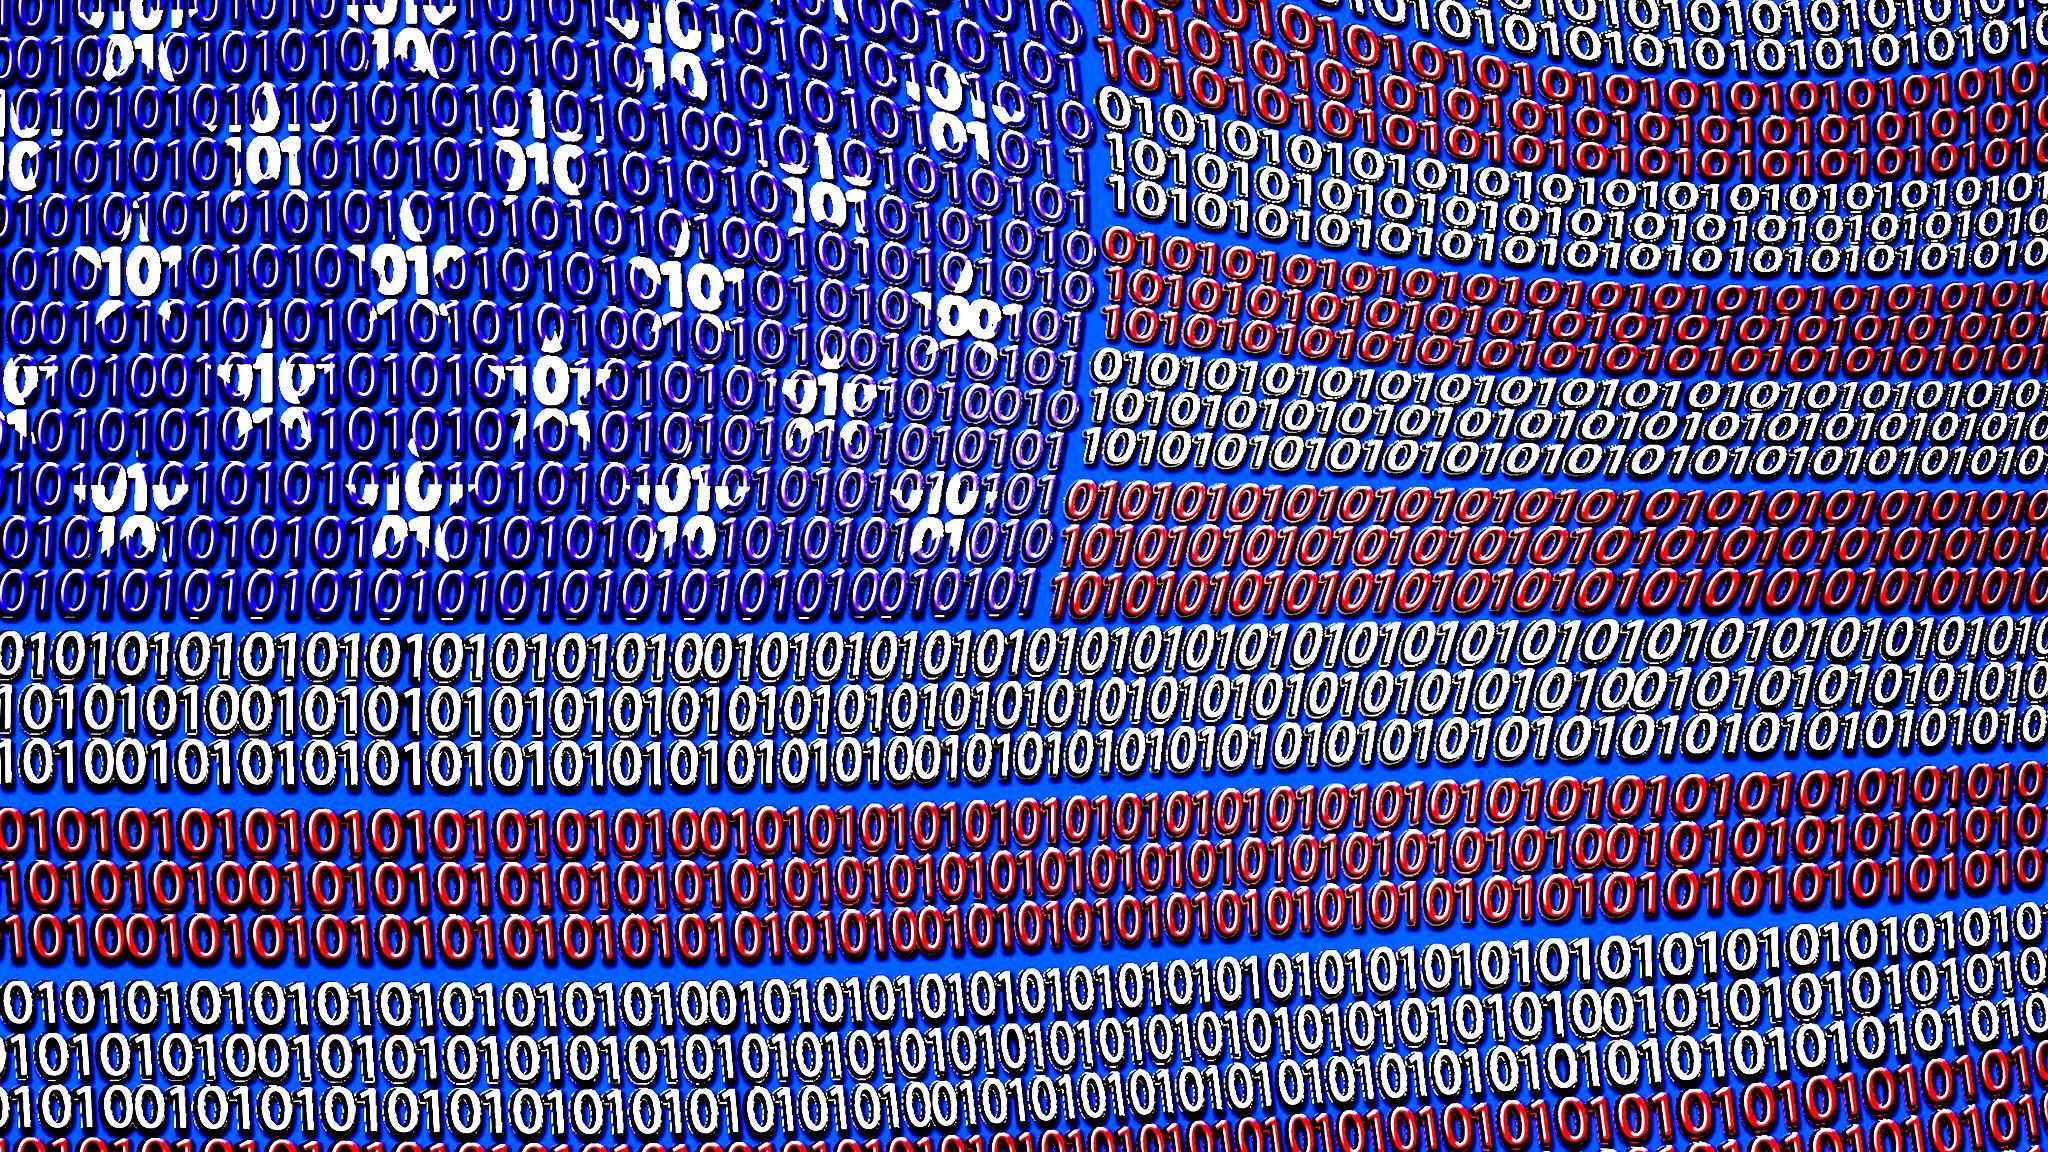 US flag made out of binary code